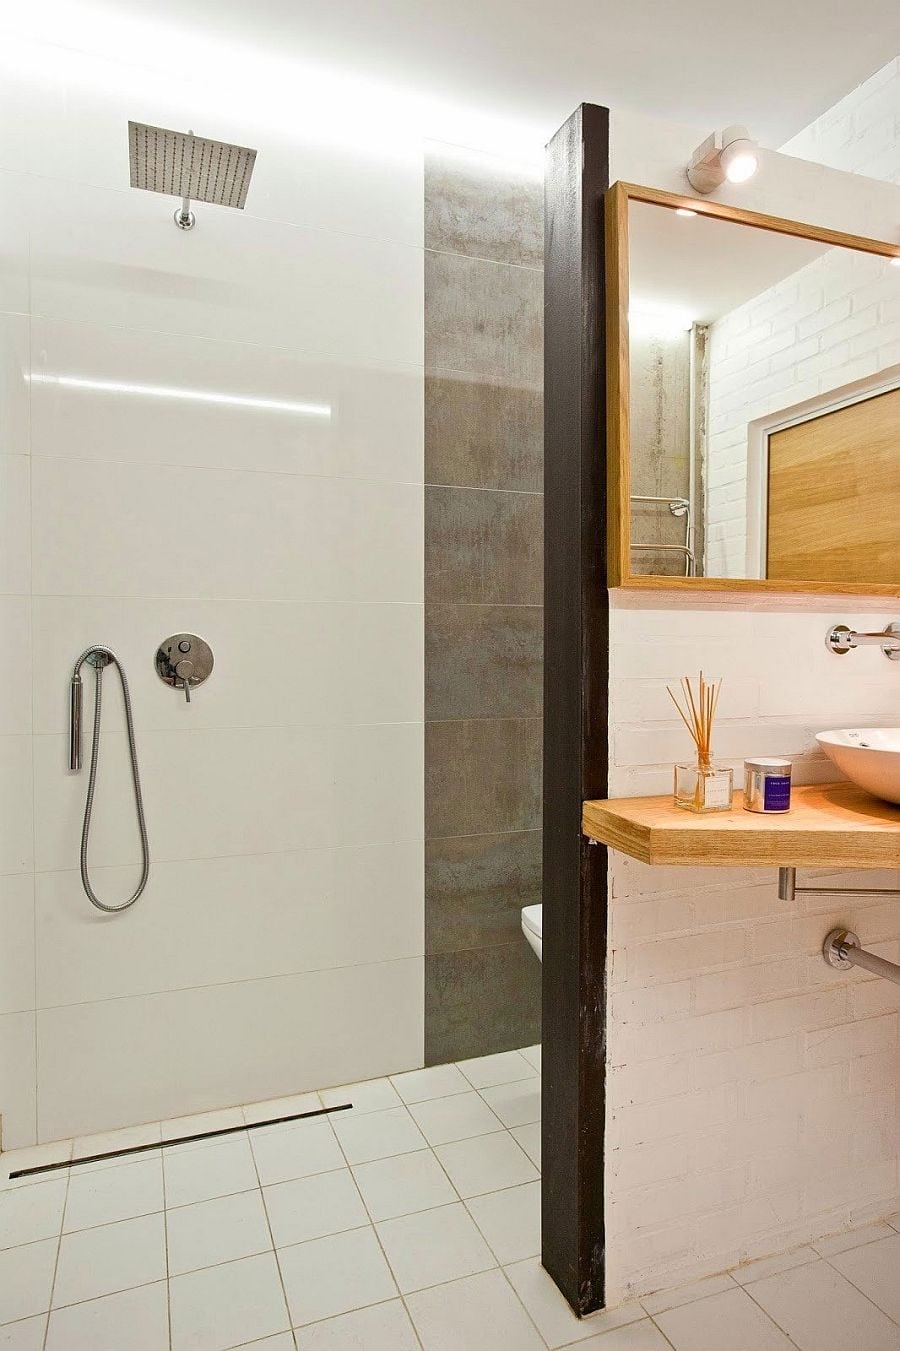 14Shower-area-of-the-small-bathroom-in-tile-and-concrete